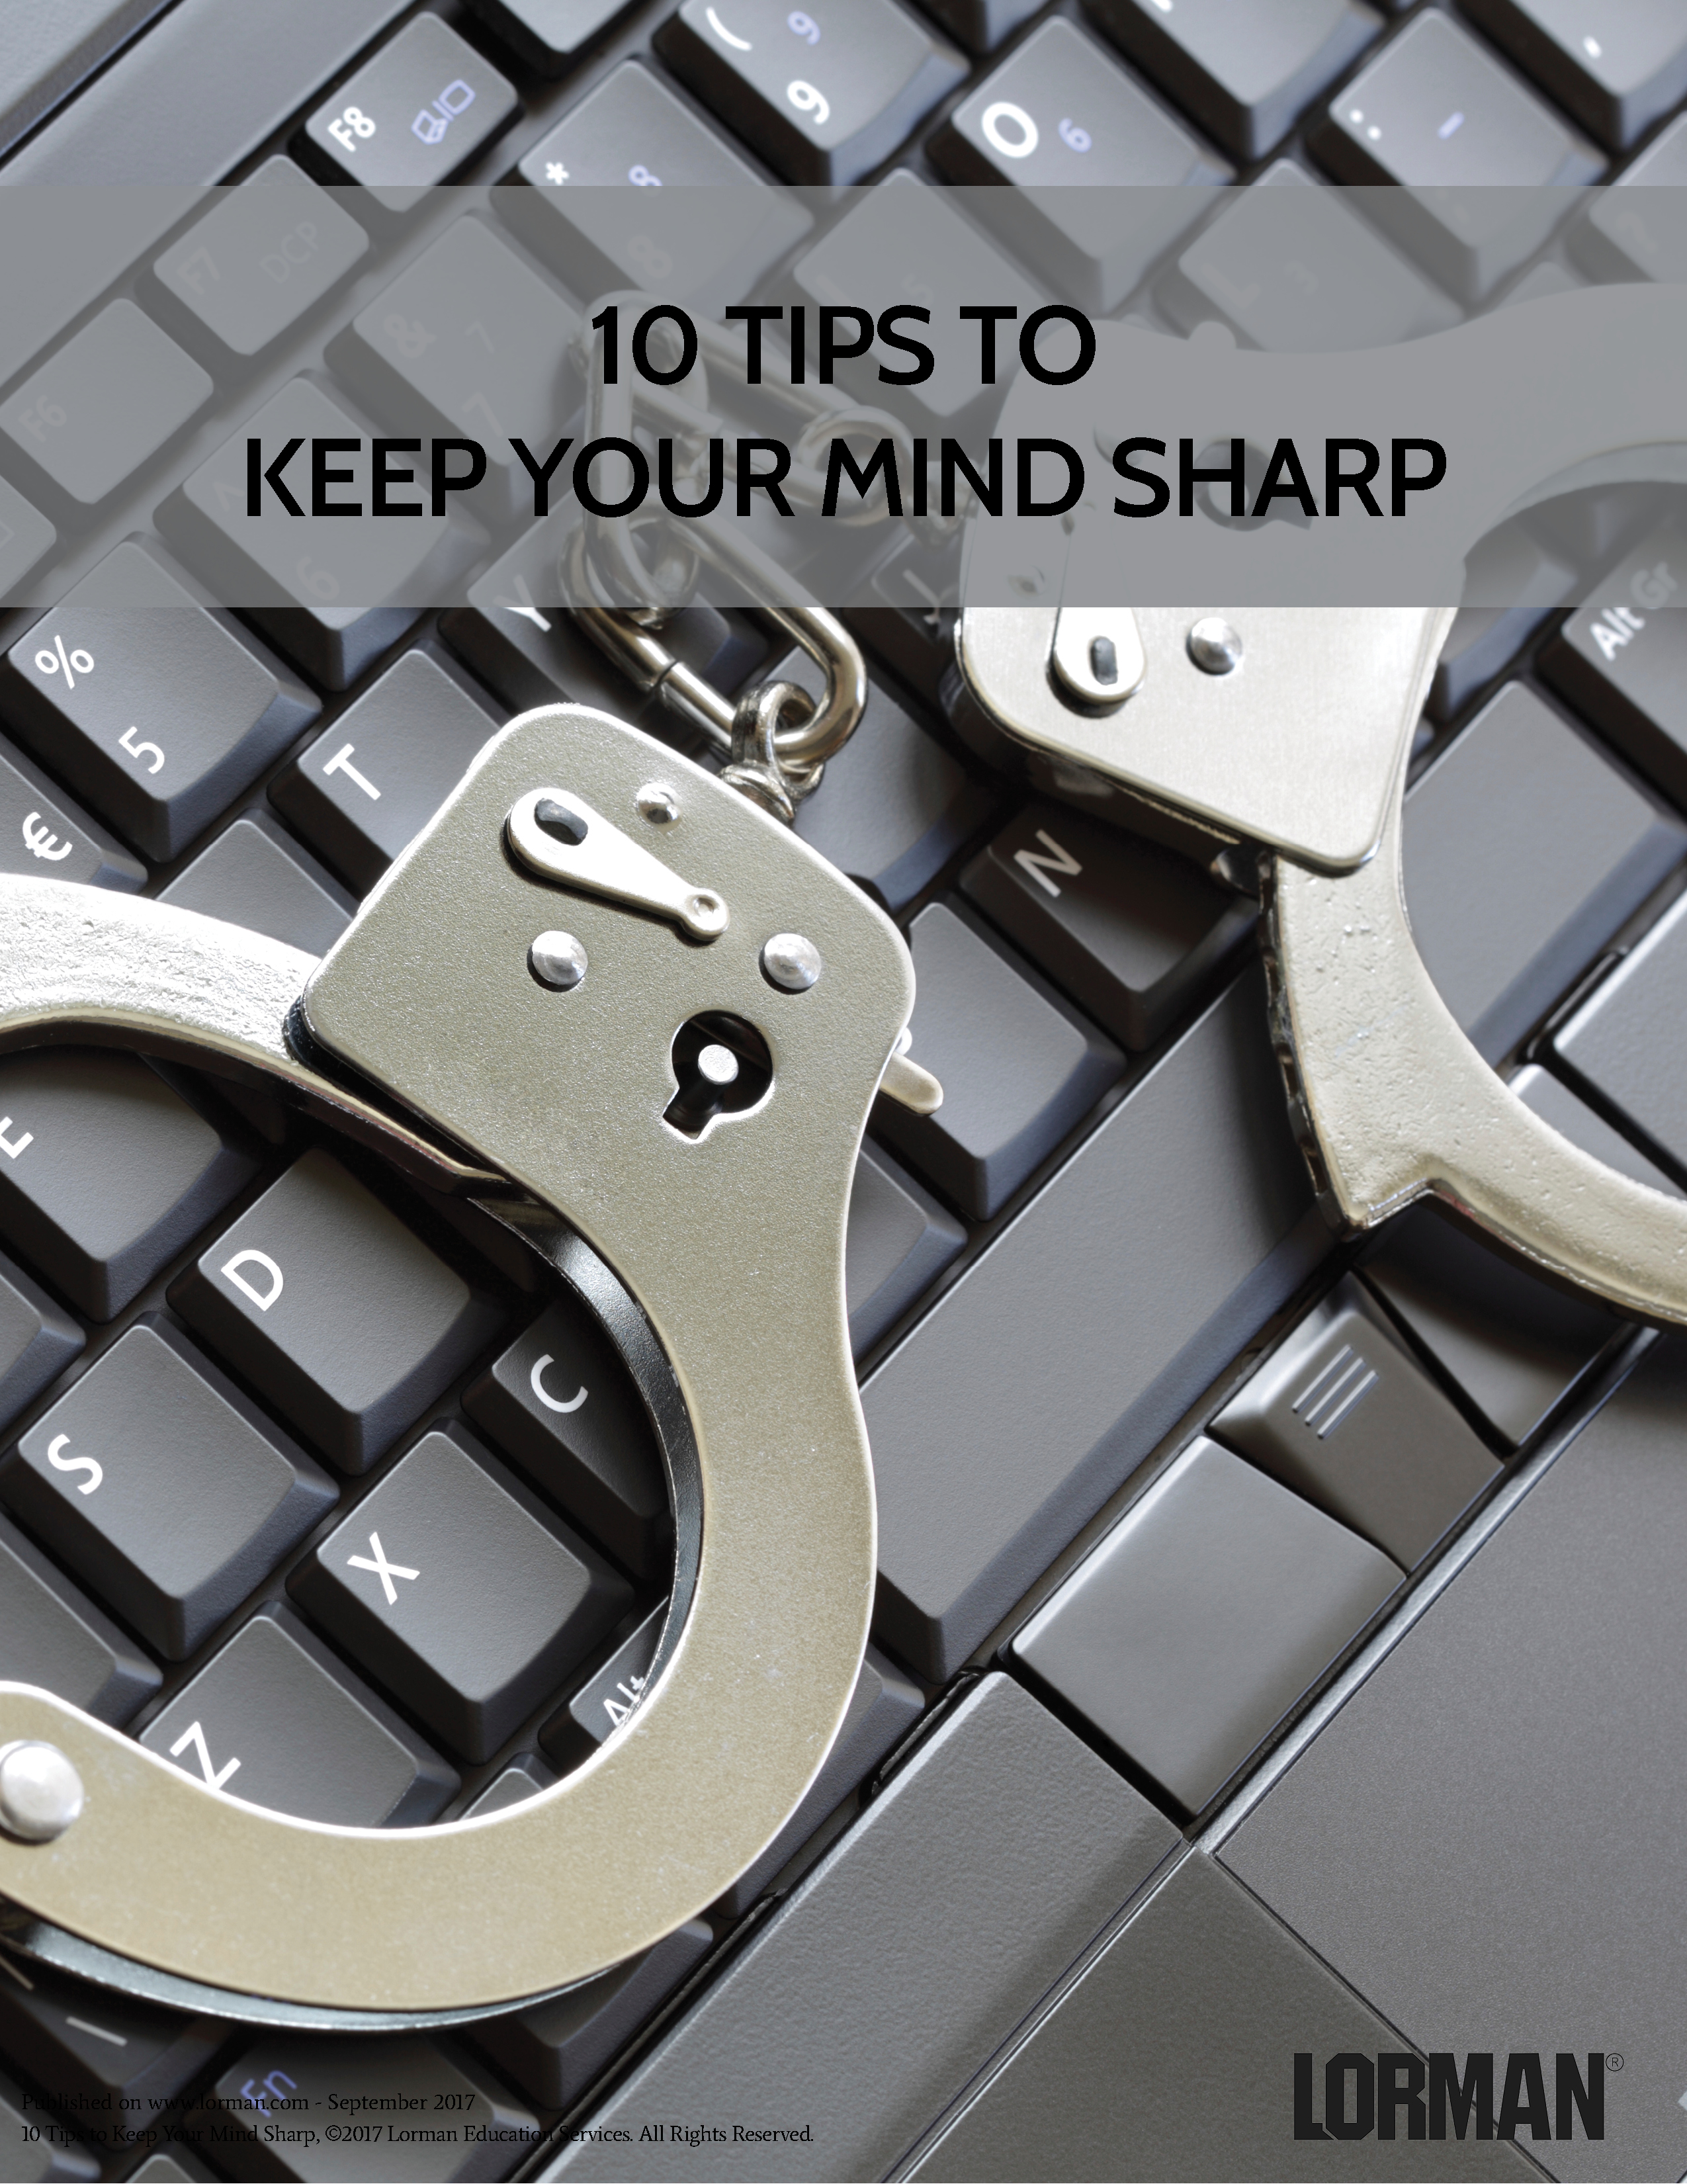 10 Tips to Keep Your Mind Sharp